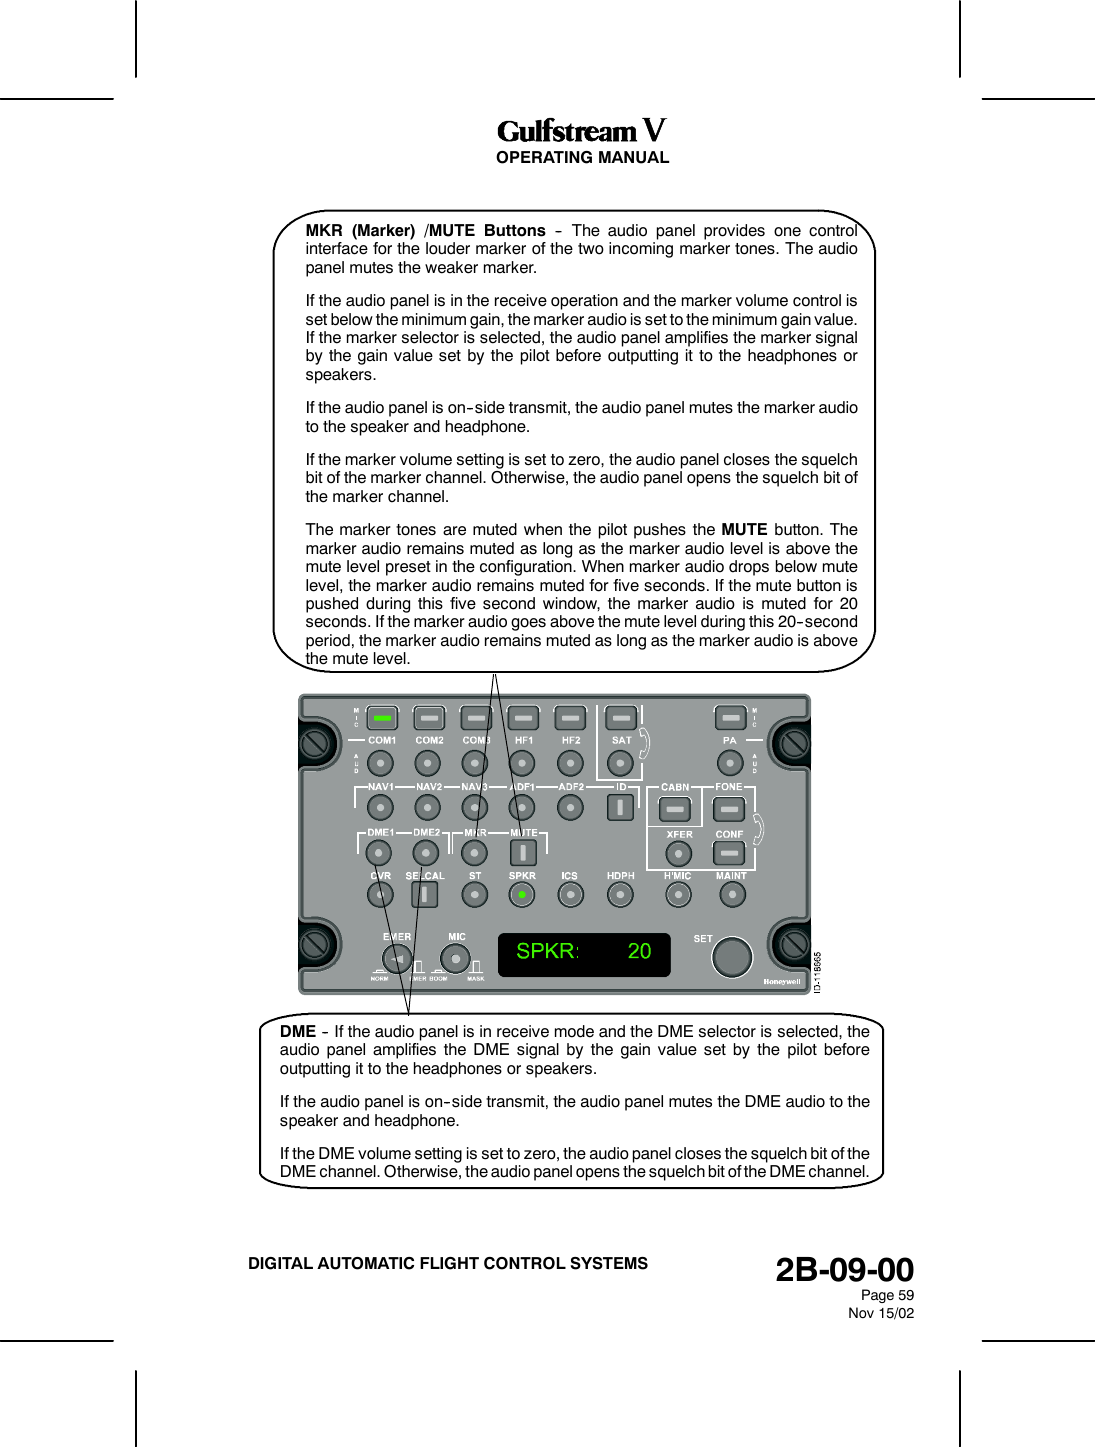 OPERATING MANUAL2B-09-00Page 59Nov 15/02DIGITAL AUTOMATIC FLIGHT CONTROL SYSTEMSMKR (Marker) /MUTE Buttons -- The audio panel provides one controlinterface for the louder marker of the two incoming marker tones. The audiopanel mutes the weaker marker.If the audio panel is in the receive operation and the marker volume control isset below the minimum gain, the marker audio is set to the minimum gain value.If the marker selector is selected, the audio panel amplifies the marker signalby the gain value set by the pilot before outputting it to the headphones orspeakers.If the audio panel is on--side transmit, the audio panel mutes the marker audioto the speaker and headphone.If the marker volume setting is set to zero, the audio panel closes the squelchbit of the marker channel. Otherwise, the audio panel opens the squelch bit ofthe marker channel.The marker tones are muted when the pilot pushes the MUTE button. Themarker audio remains muted as long as the marker audio level is above themute level preset in the configuration. When marker audio drops below mutelevel, the marker audio remains muted for five seconds. If the mute button ispushed during this five second window, the marker audio is muted for 20seconds. If the marker audio goes above the mute level during this 20--secondperiod, the marker audio remains muted as long as the marker audio is abovethe mute level.DME -- If the audio panel is in receive mode and the DME selector is selected, theaudio panel amplifies the DME signal by the gain value set by the pilot beforeoutputting it to the headphones or speakers.If the audio panel is on--side transmit, the audio panel mutes the DME audio to thespeaker and headphone.If the DME volume setting is set to zero, the audio panel closes the squelch bit of theDME channel. Otherwise, the audio panel opens the squelch bit of the DME channel.